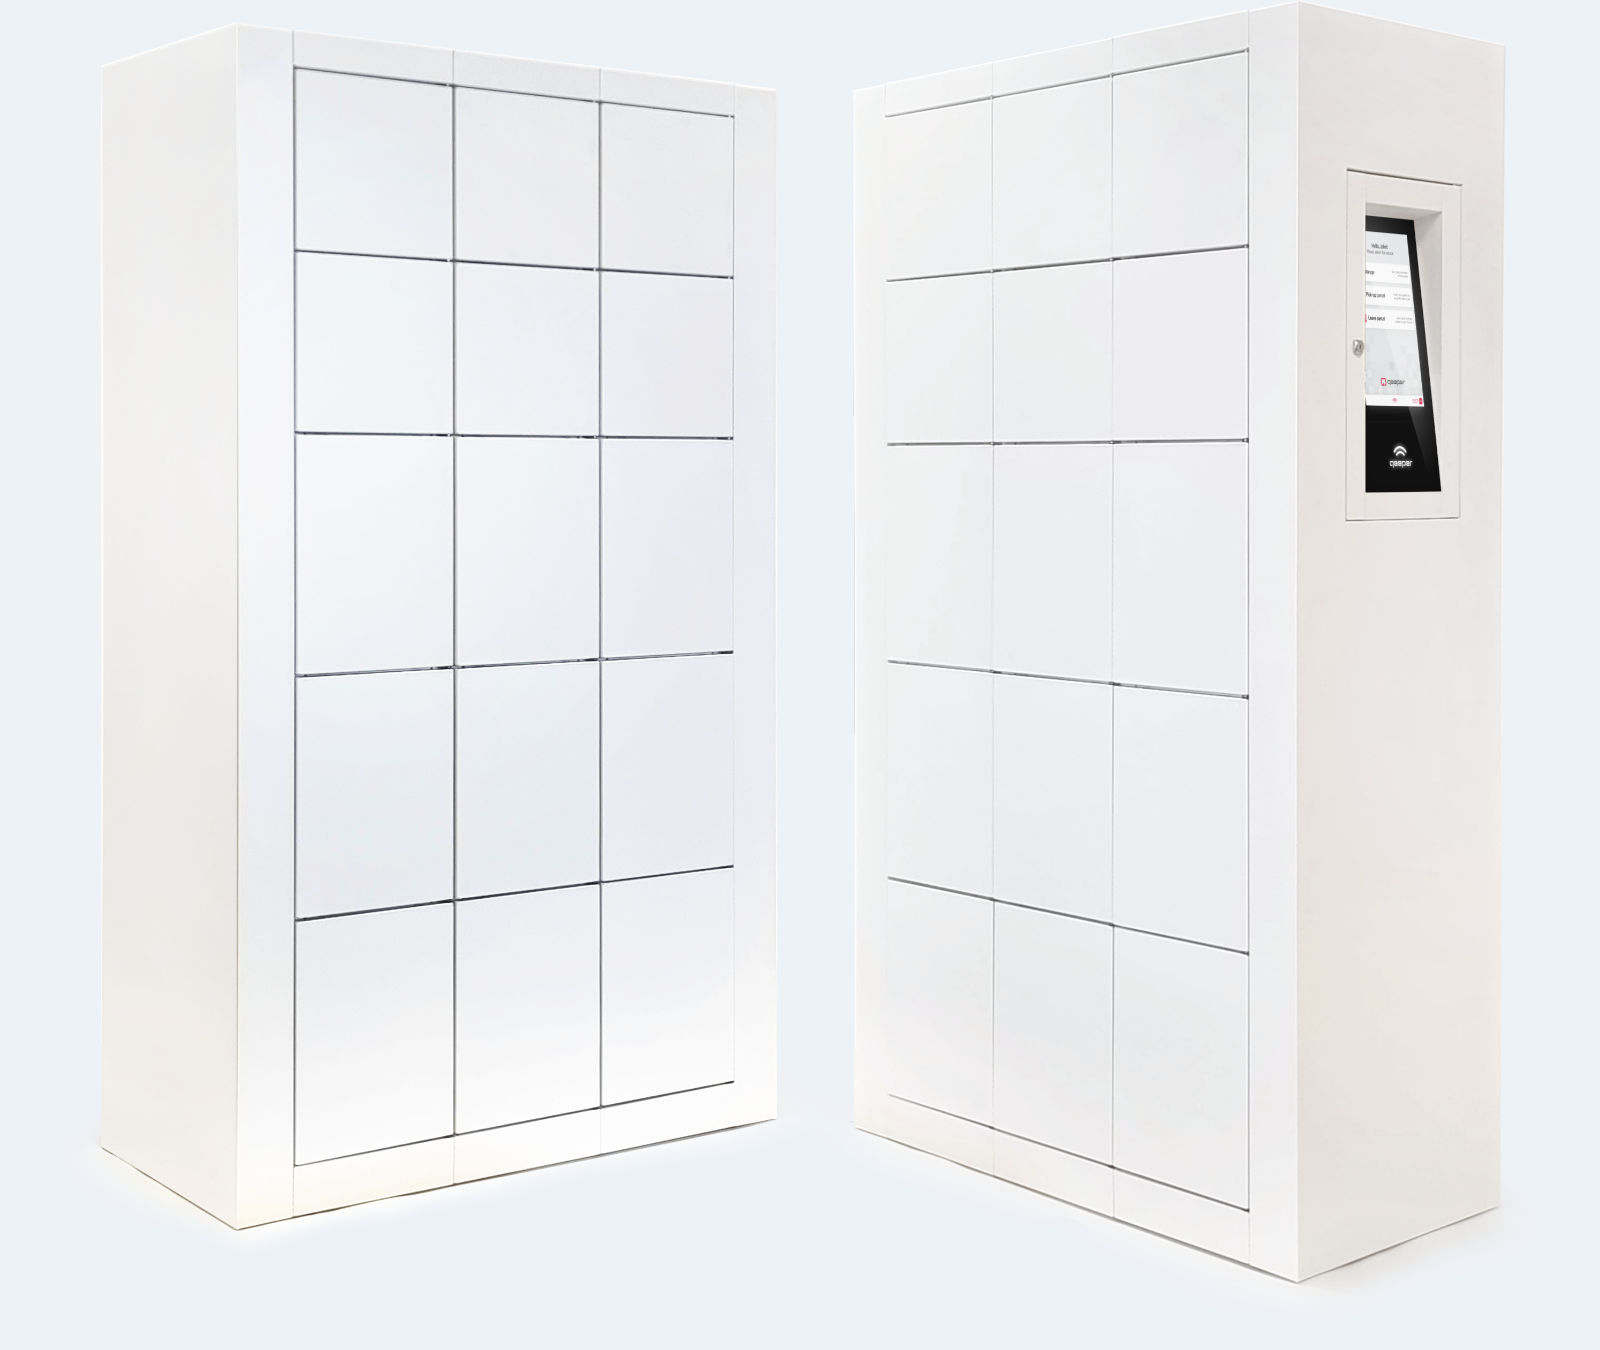 Metal cabinet with electronically lockable boxes with a touch screen controller display